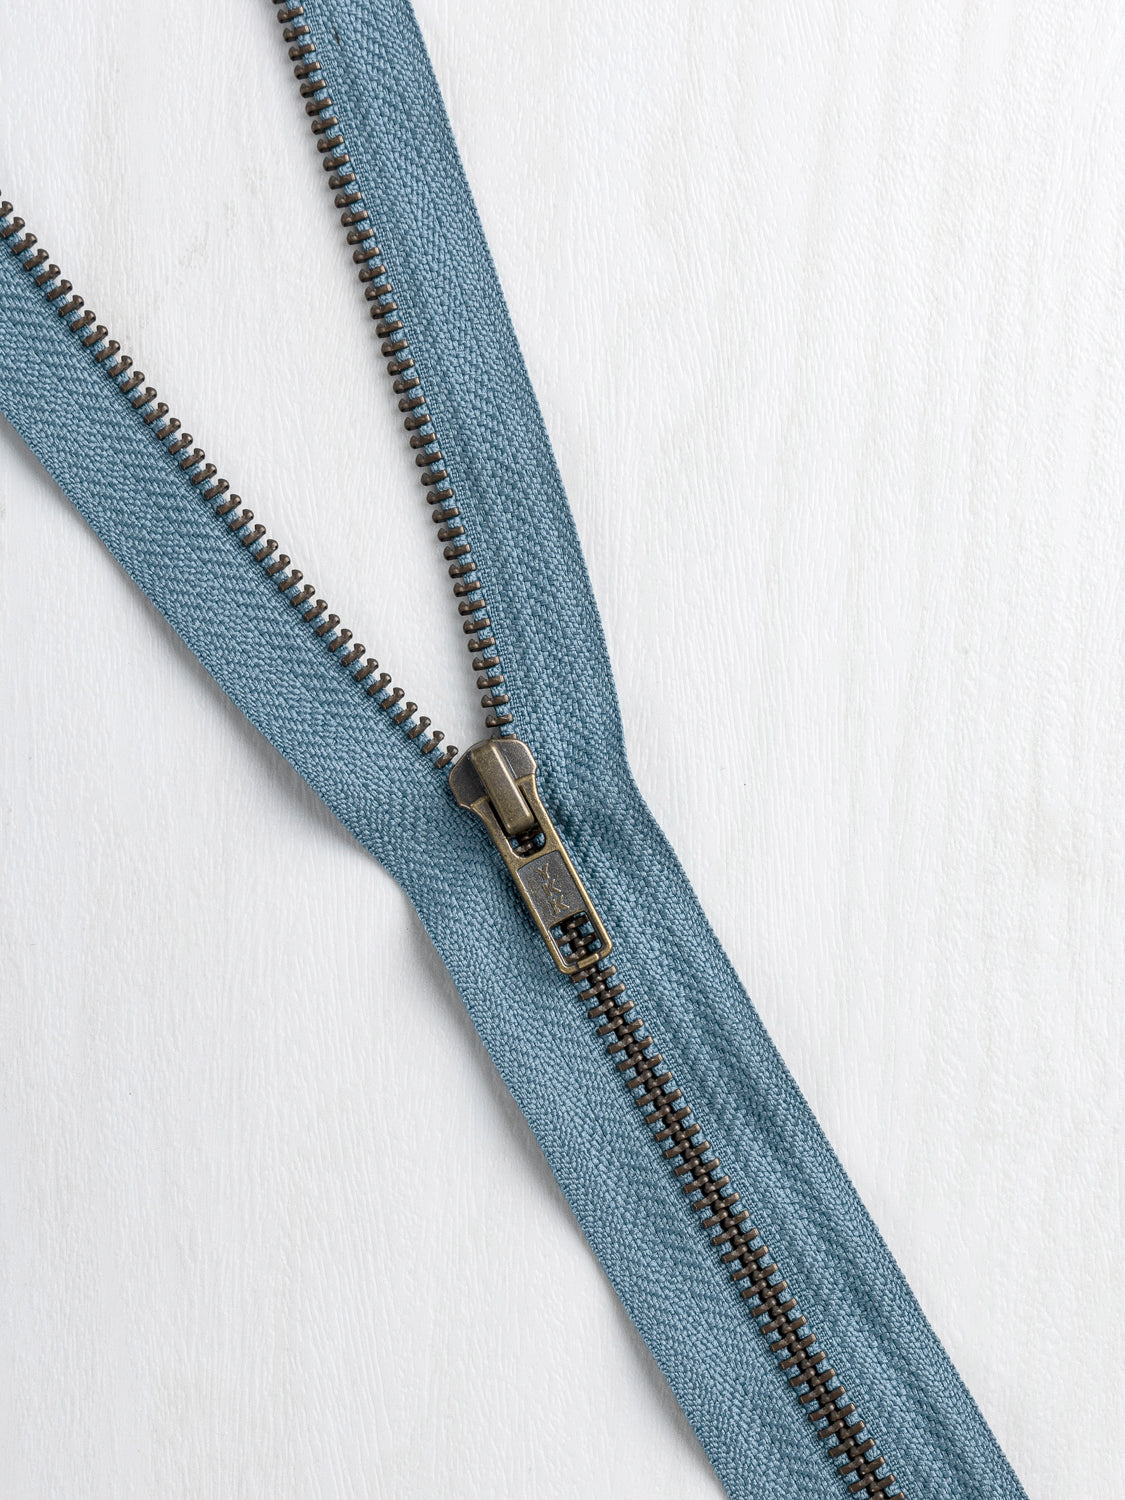 28' Separating One-Way Zipper with Antique Brass Teeth - 7 colours | Core Fabrics